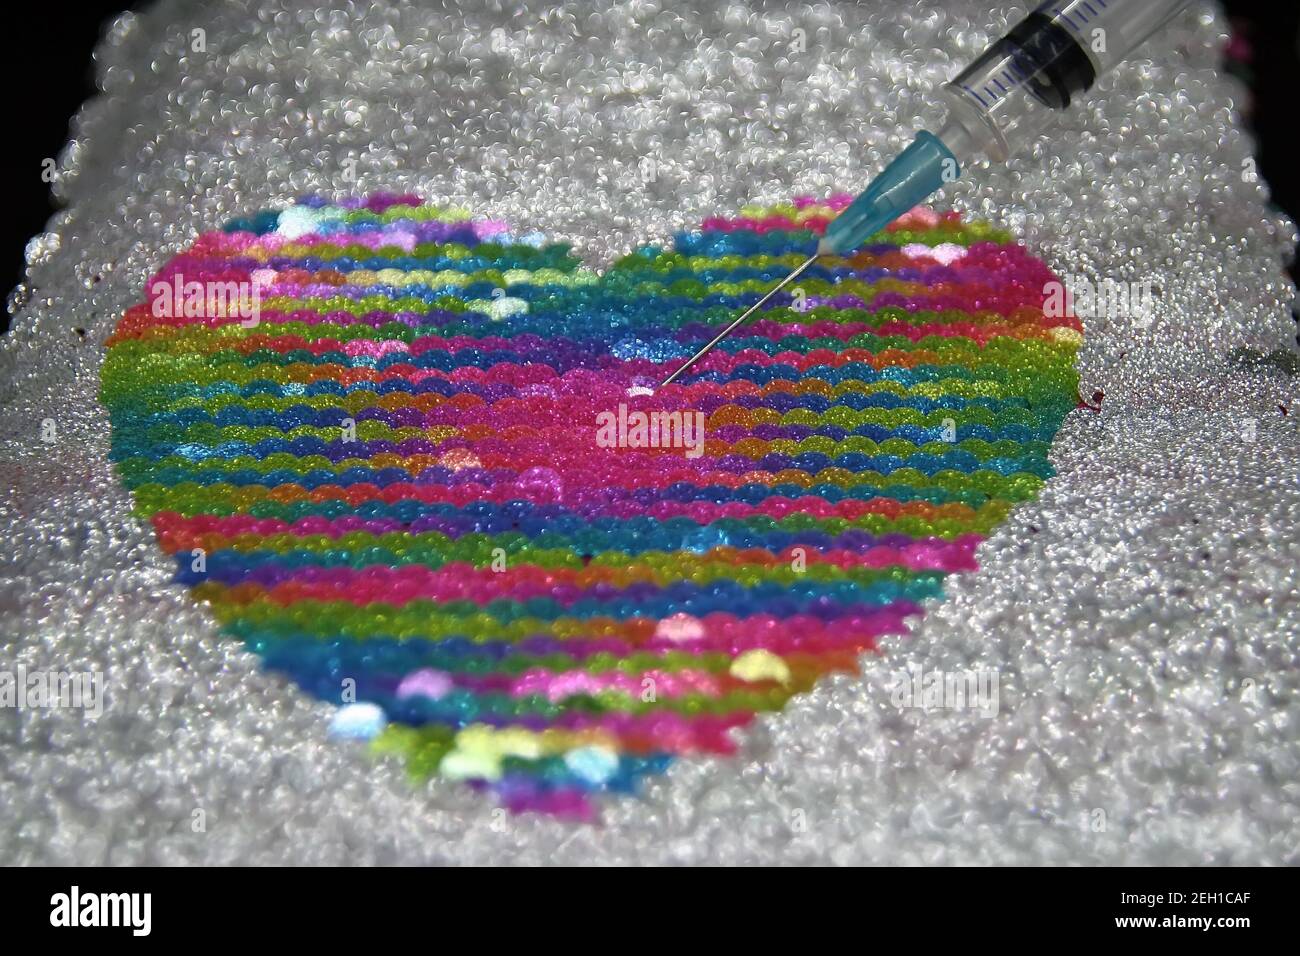 Medical Syringe and a Heart. Heart shaped object and a Cure. Stock Photo